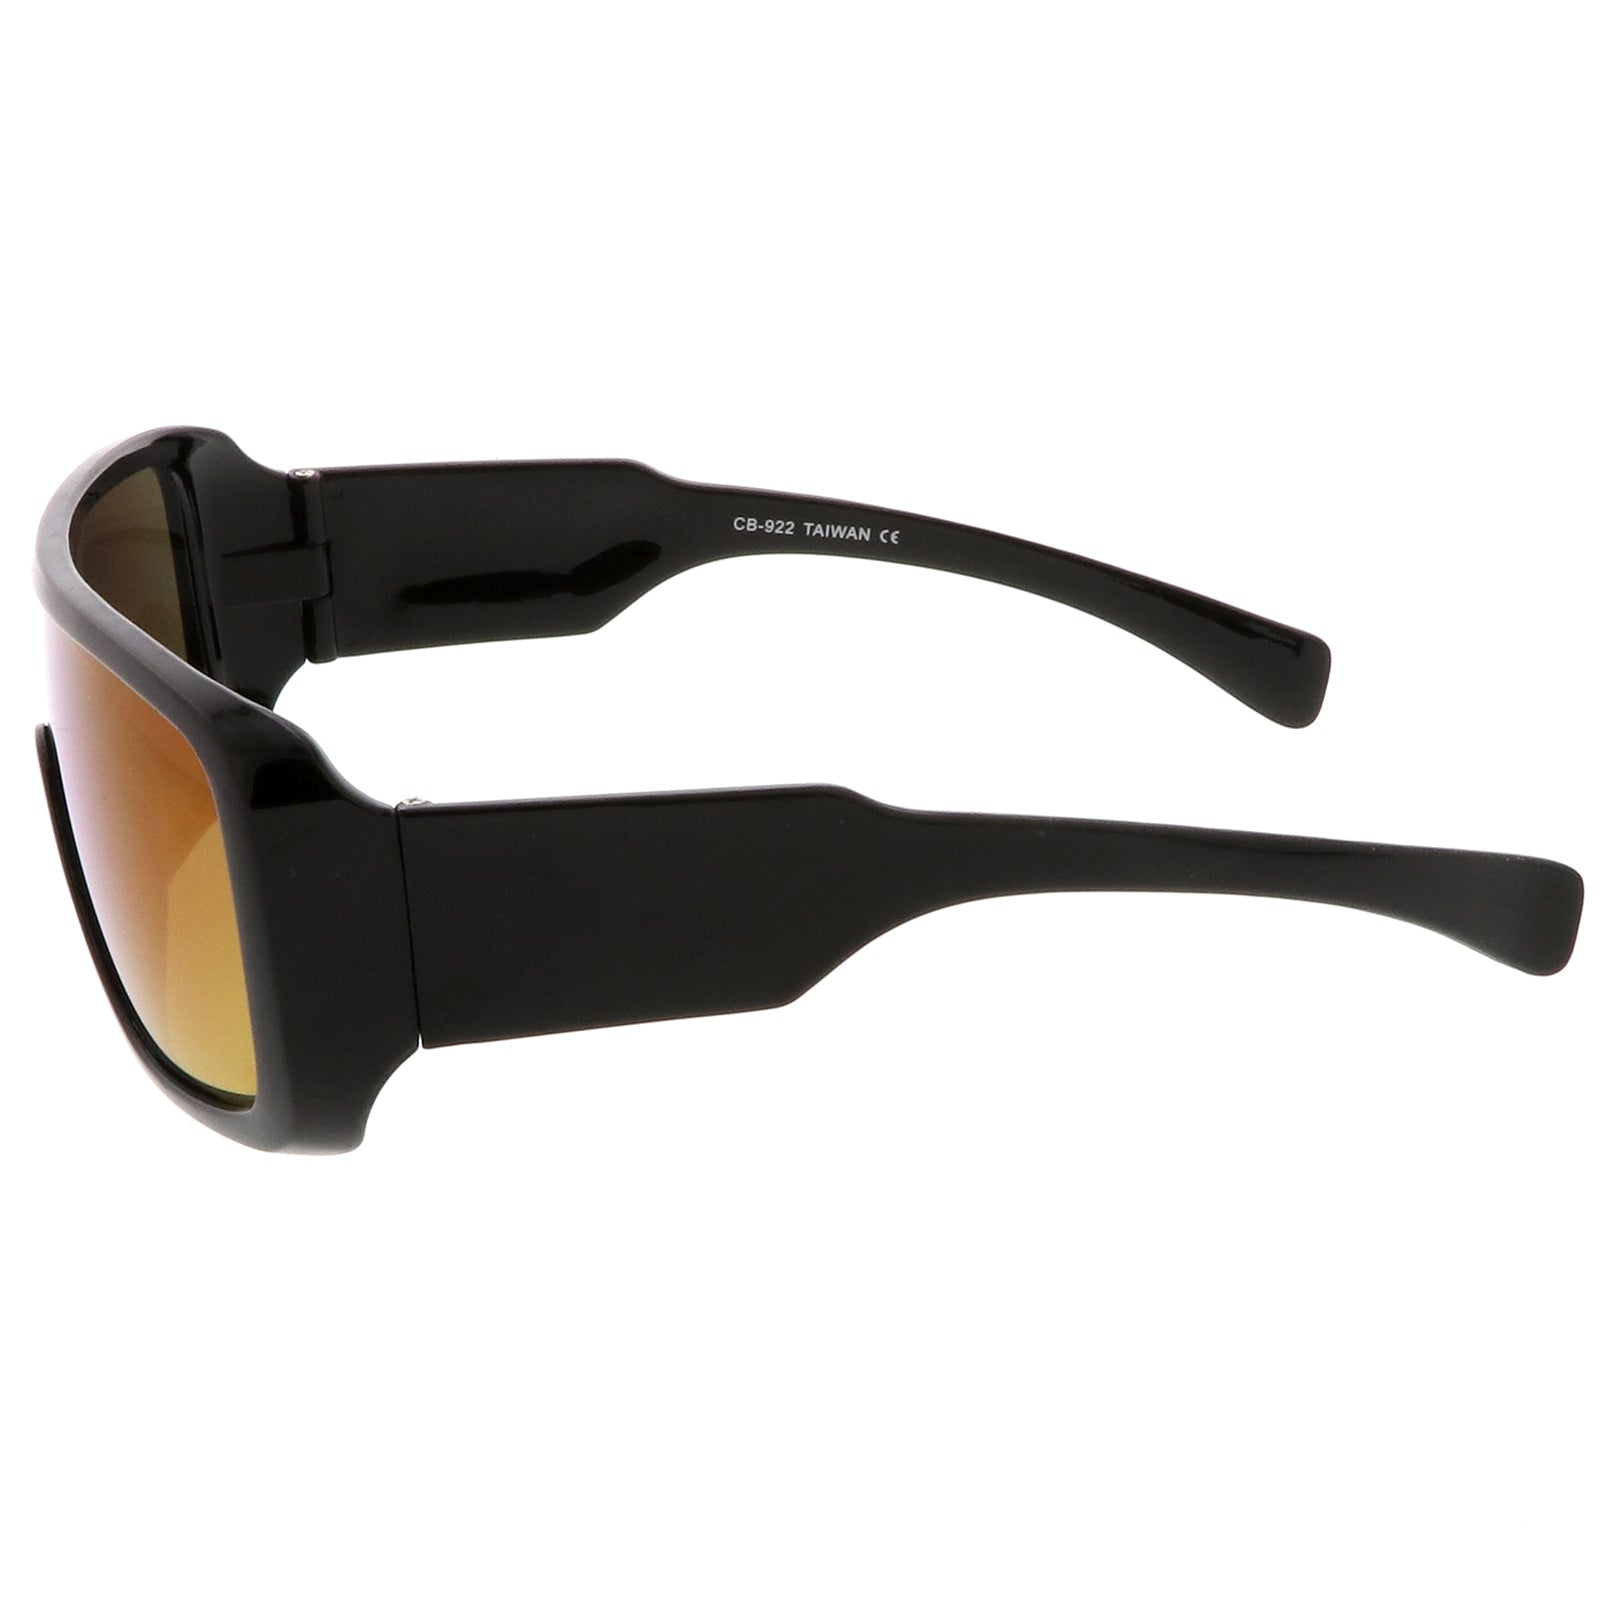 New Arrived Polarized Cycling Sunglasses Men Mirrored lens TR90